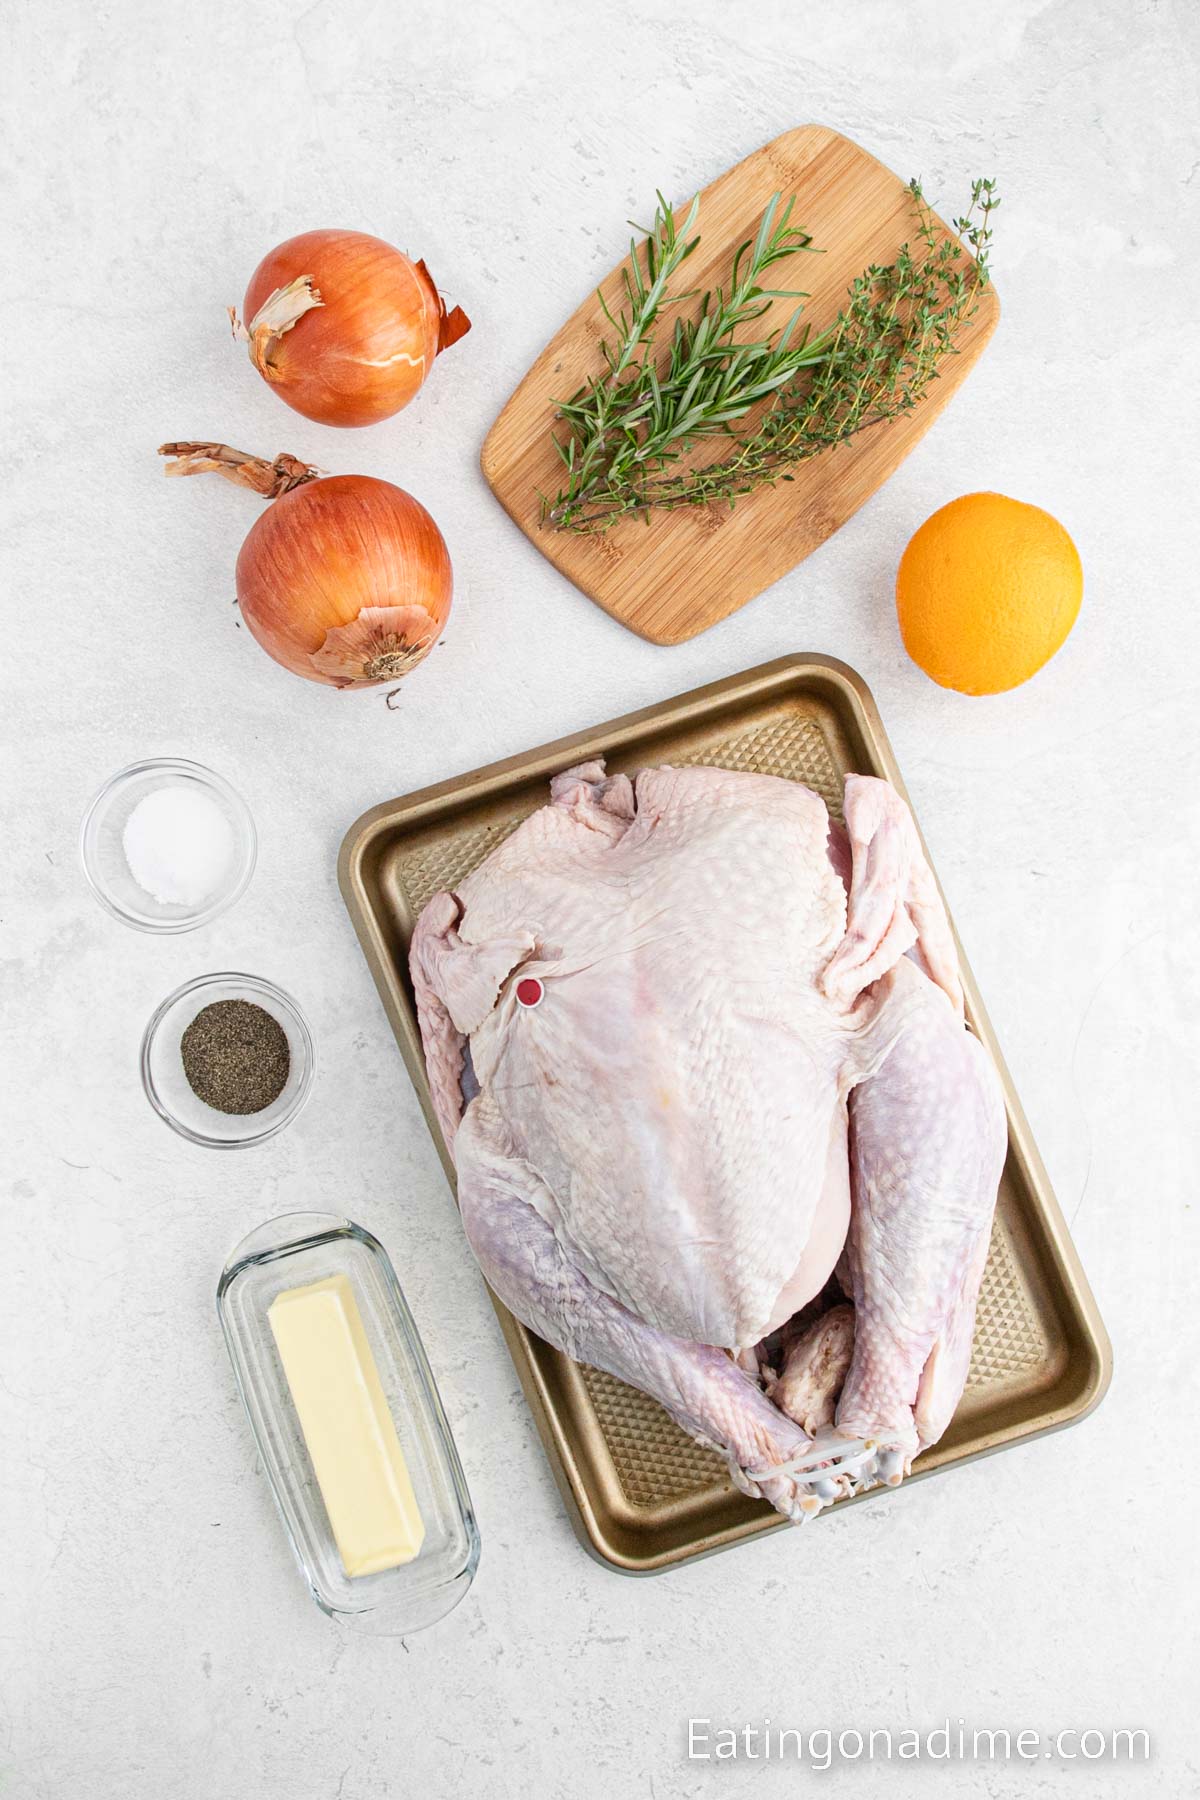 Ingredients for Christmas Turkey - Whole Turkey, large onion, large orange, rosemary sprigs, thyme sprigs, butter, salt and pepper